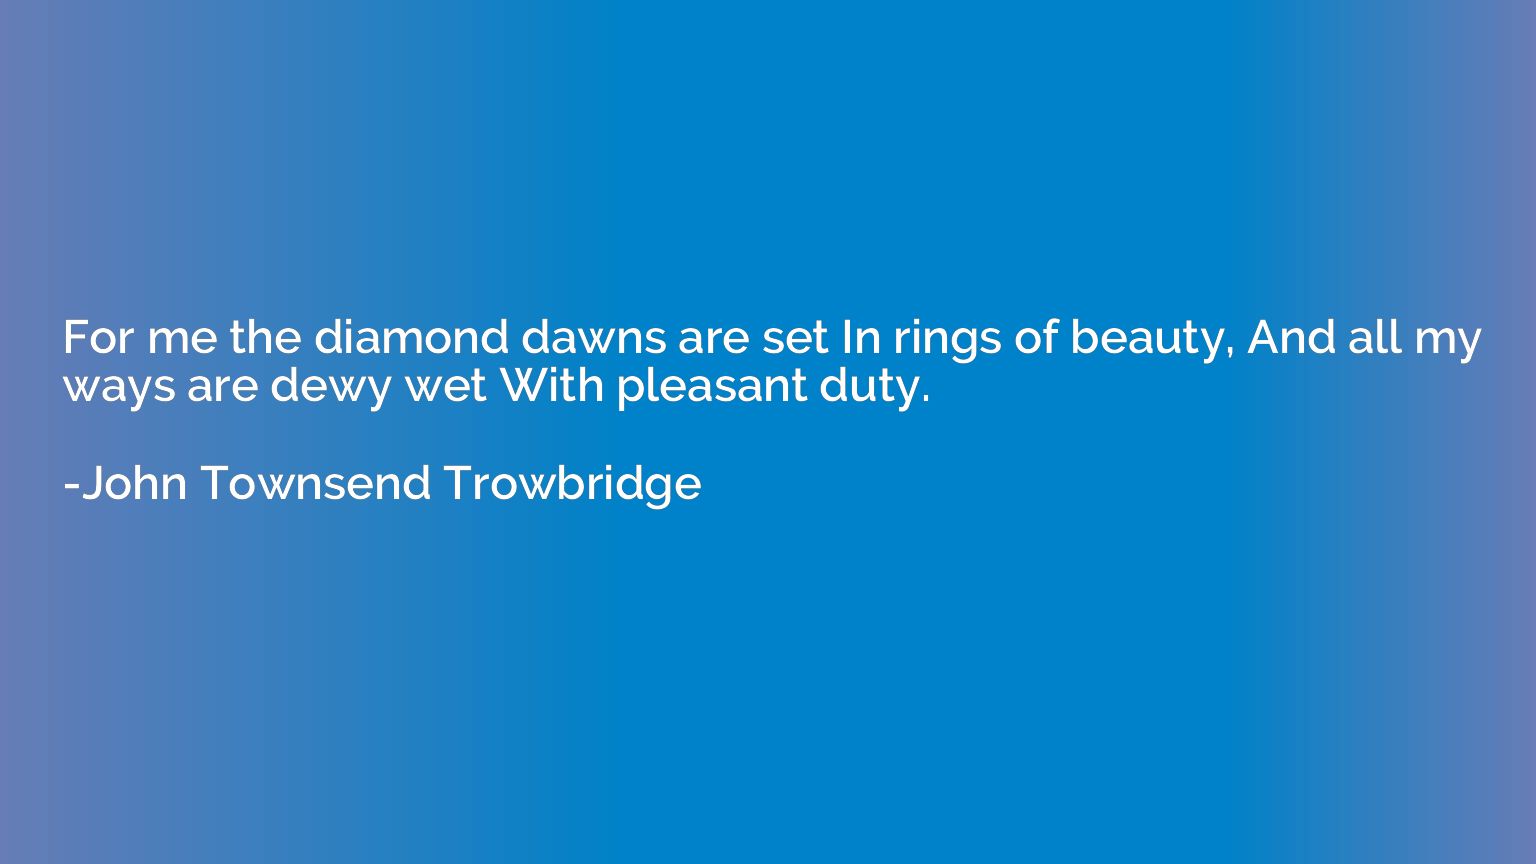 For me the diamond dawns are set In rings of beauty, And all